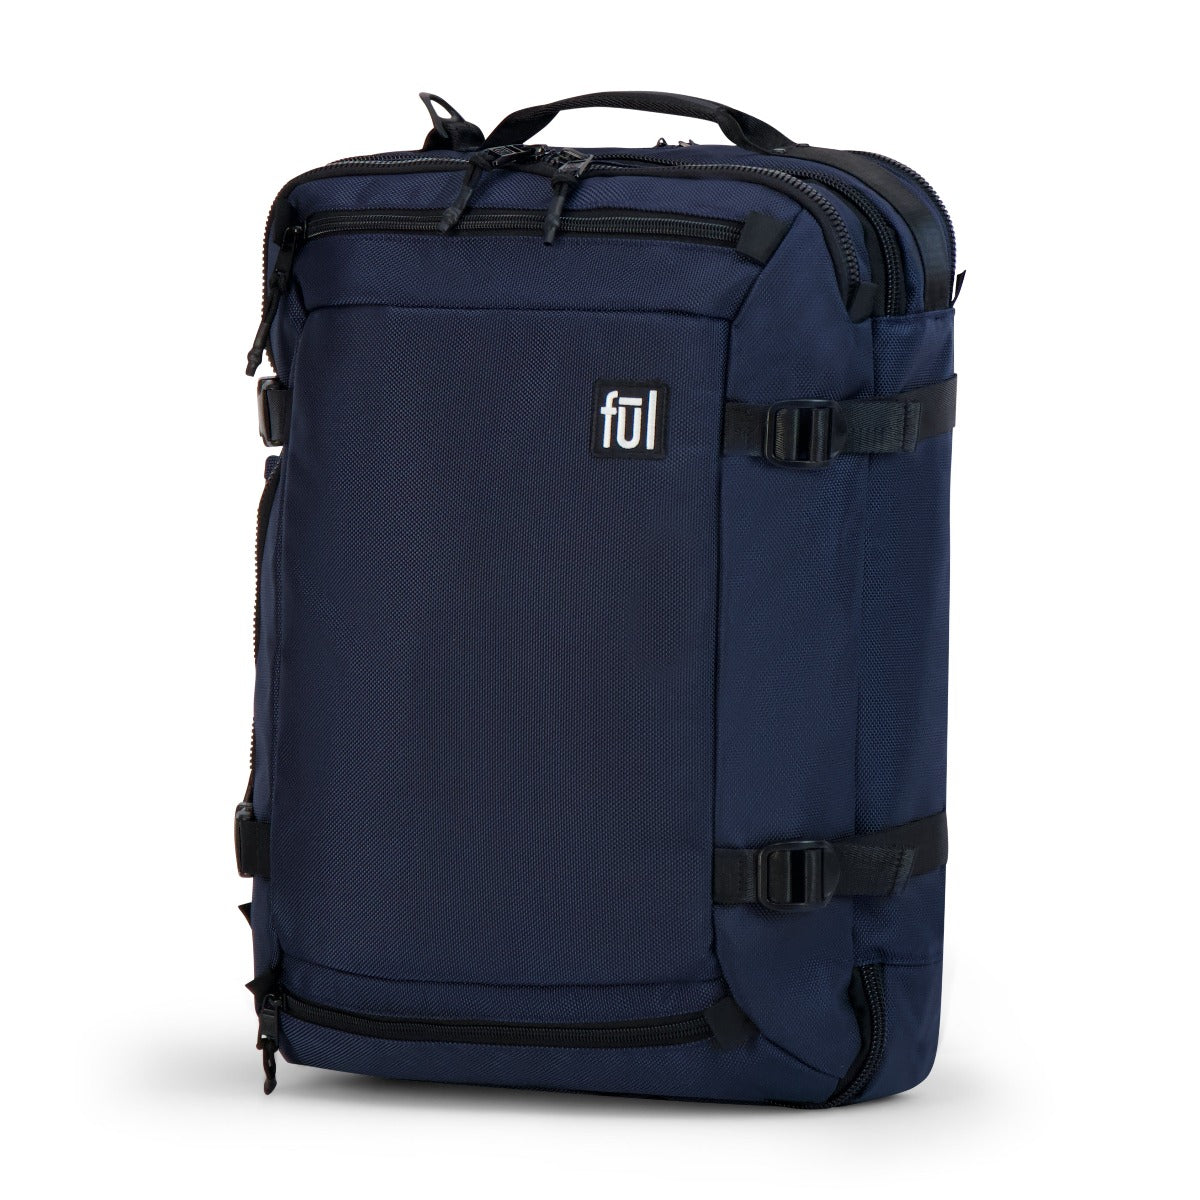 ful ridge collection cruiser travel backpack navy blue - convertible carry on backpacks